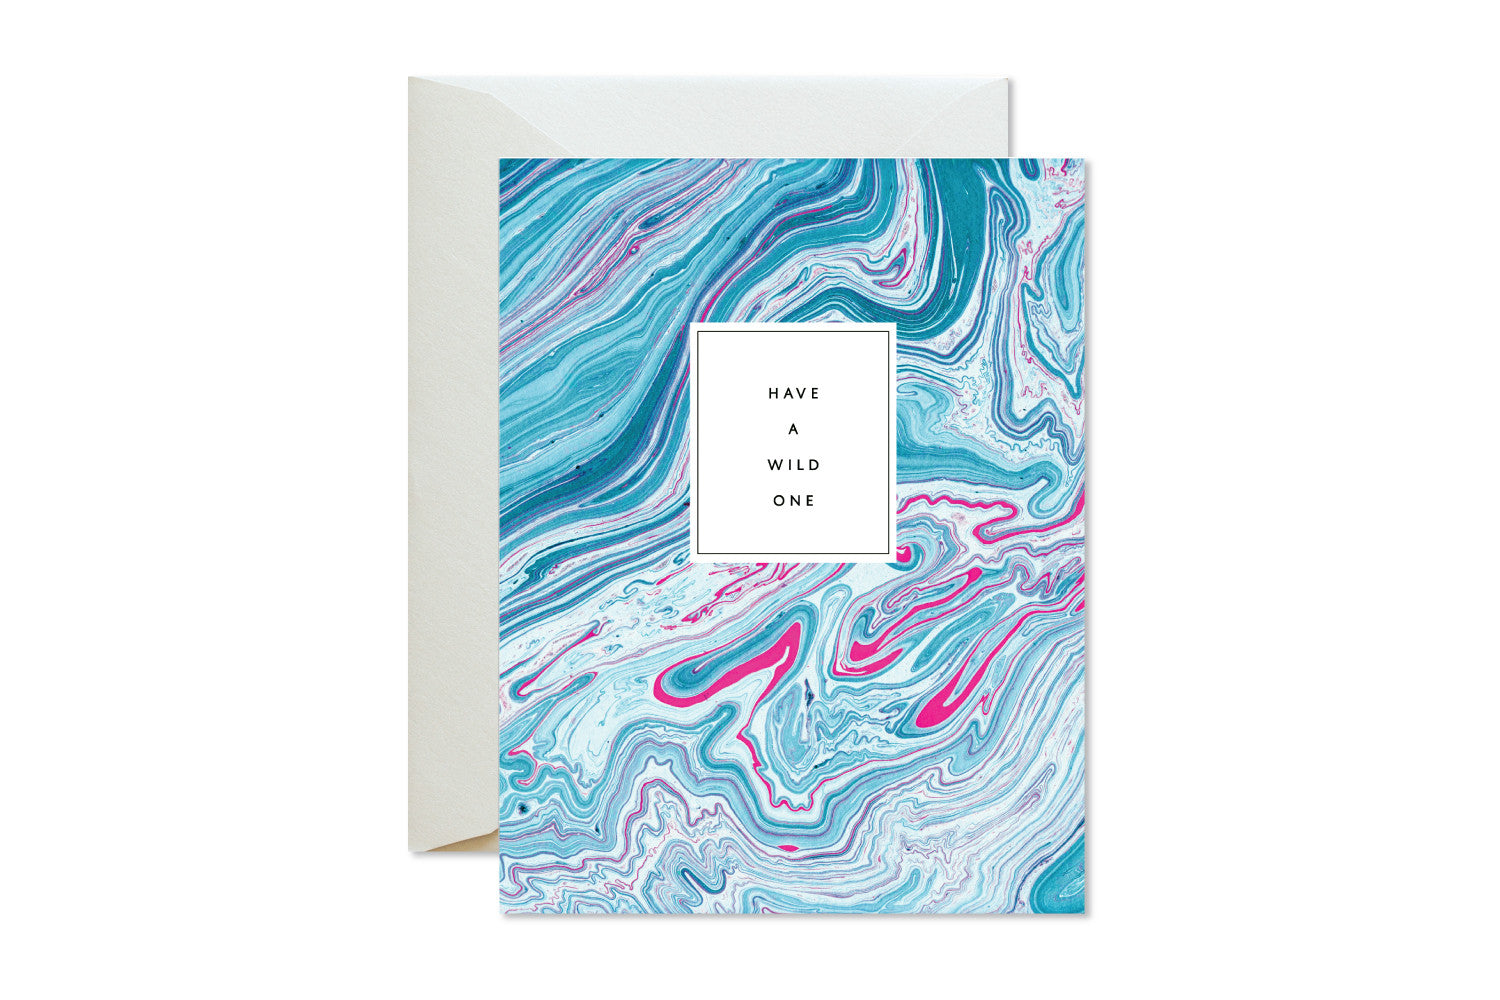 HAVE A WILD ONE Turquoise and Pink Marble Greeting Card by pixelimpress